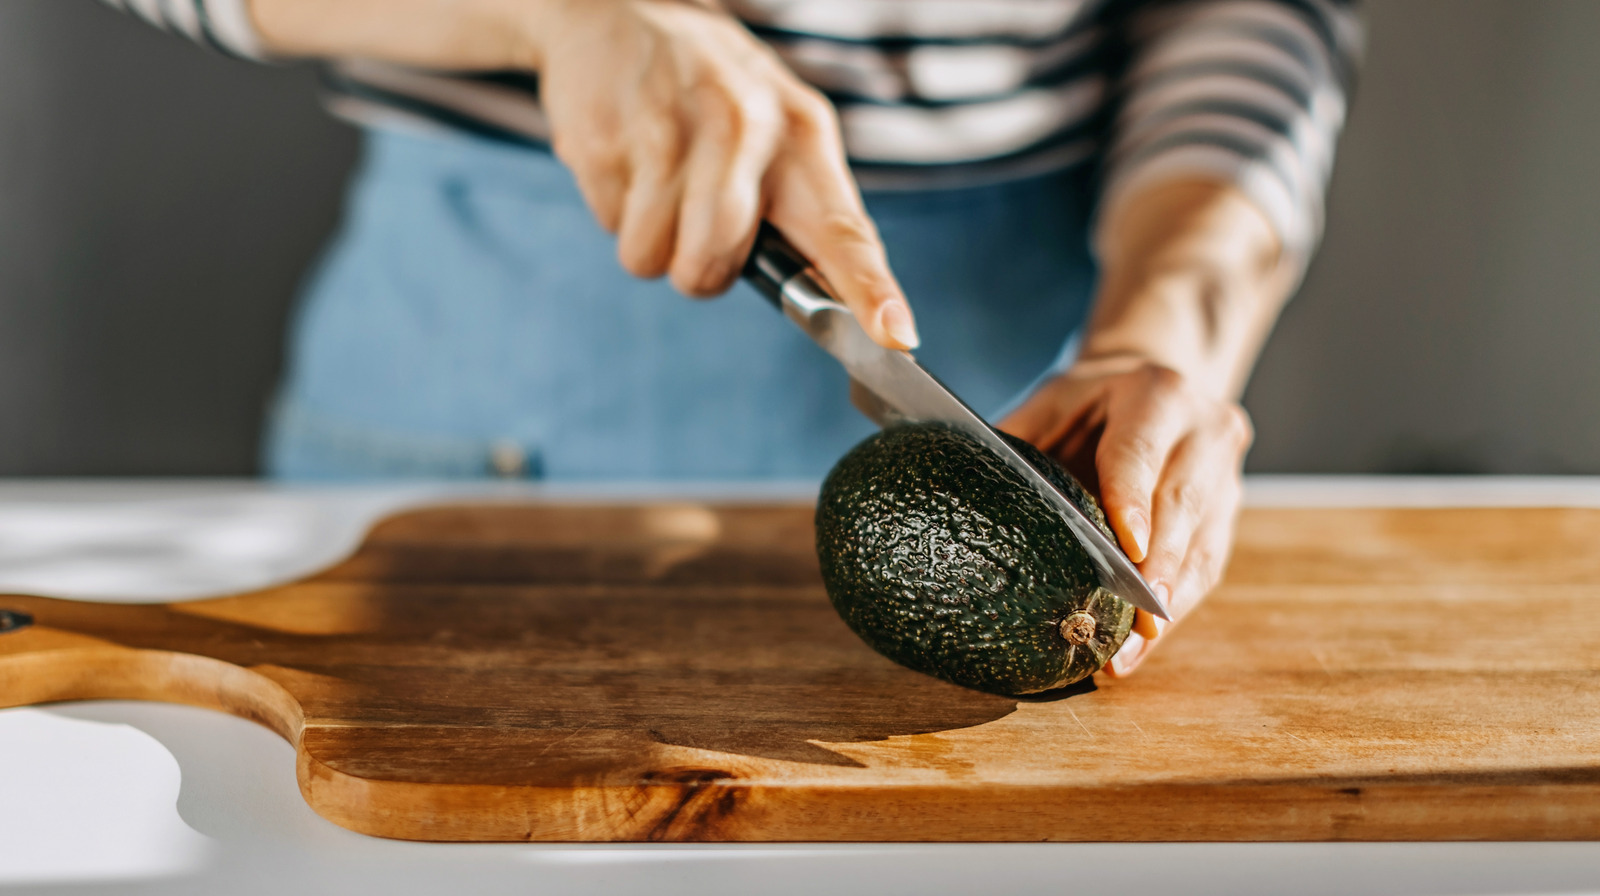 The Only Knife You Should Be Using To Cut Avocados